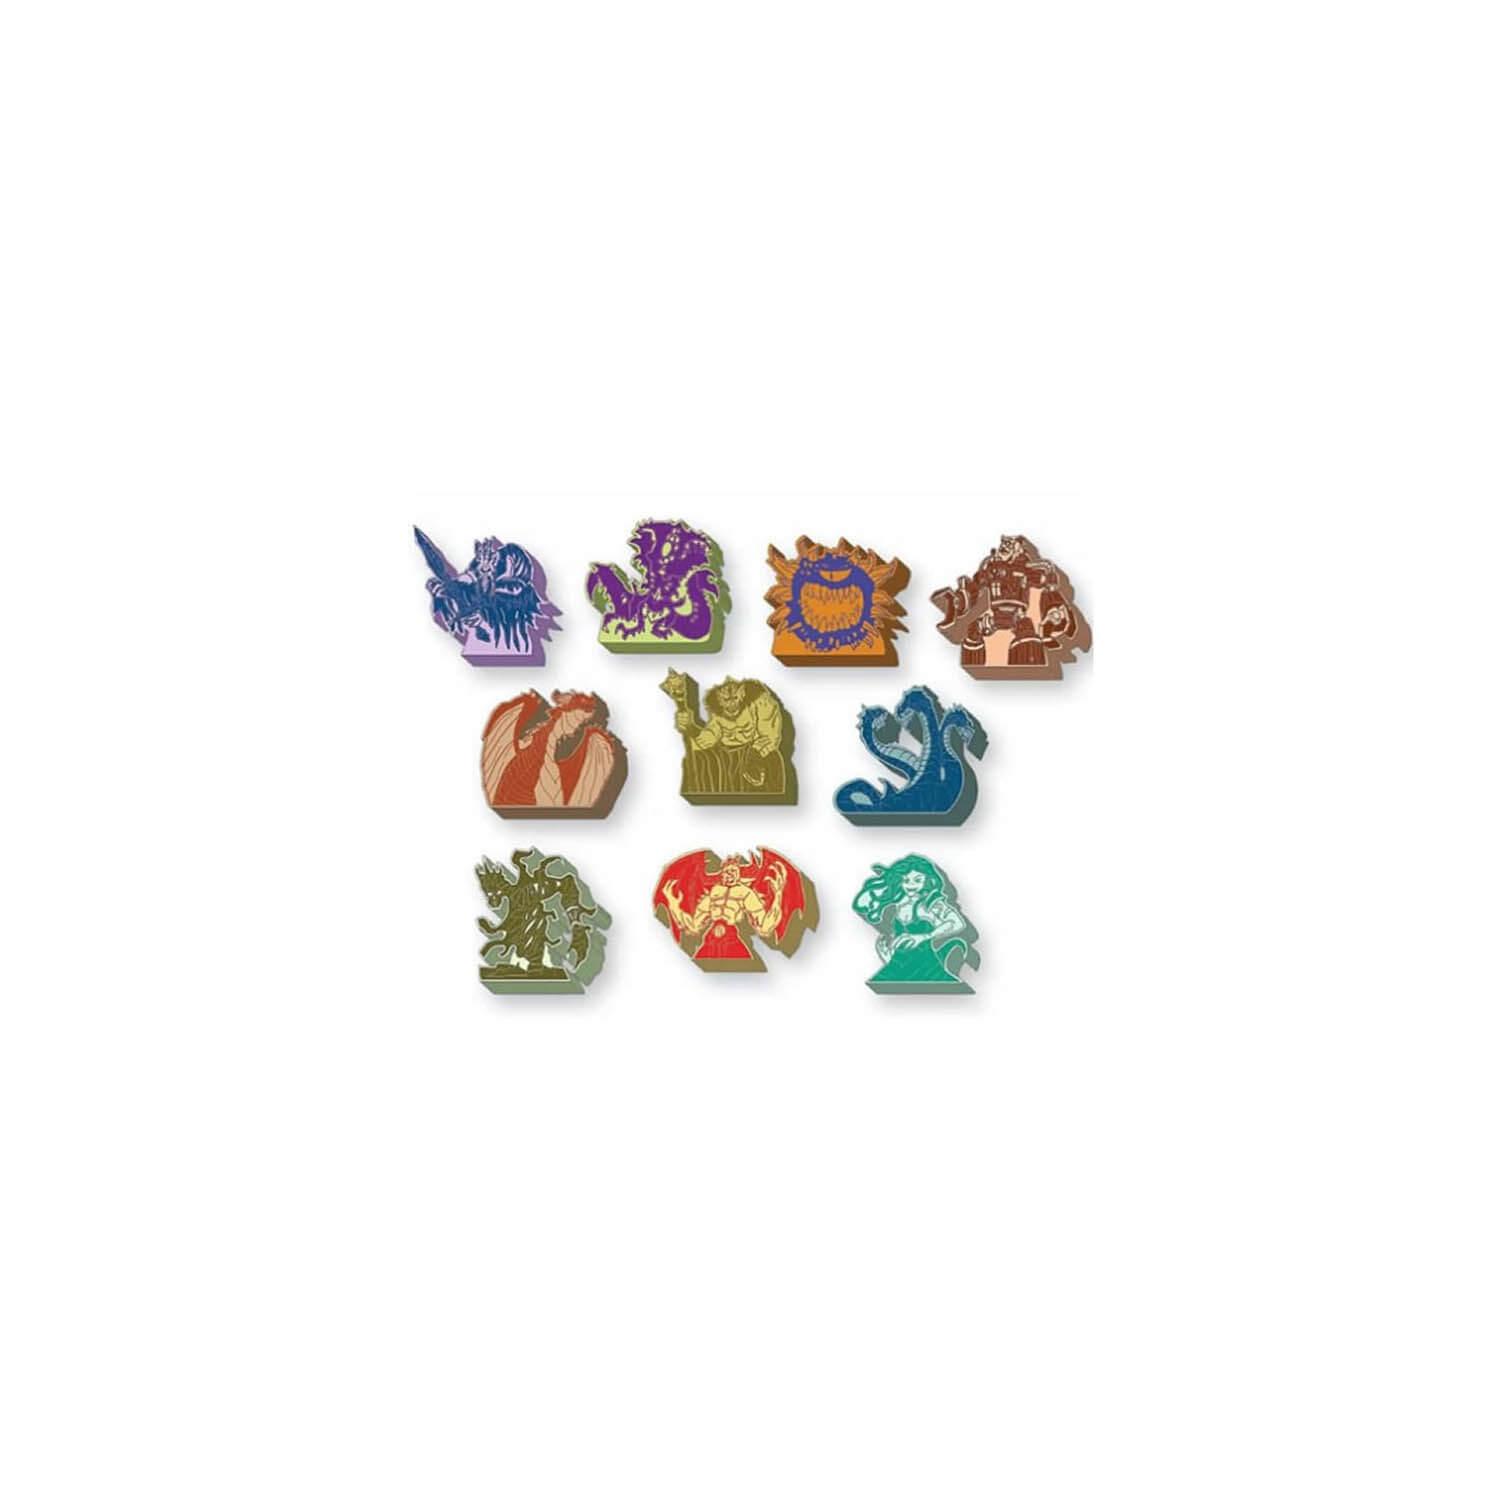 Tiny Epic Dungeons Meeple Upgrade Pack